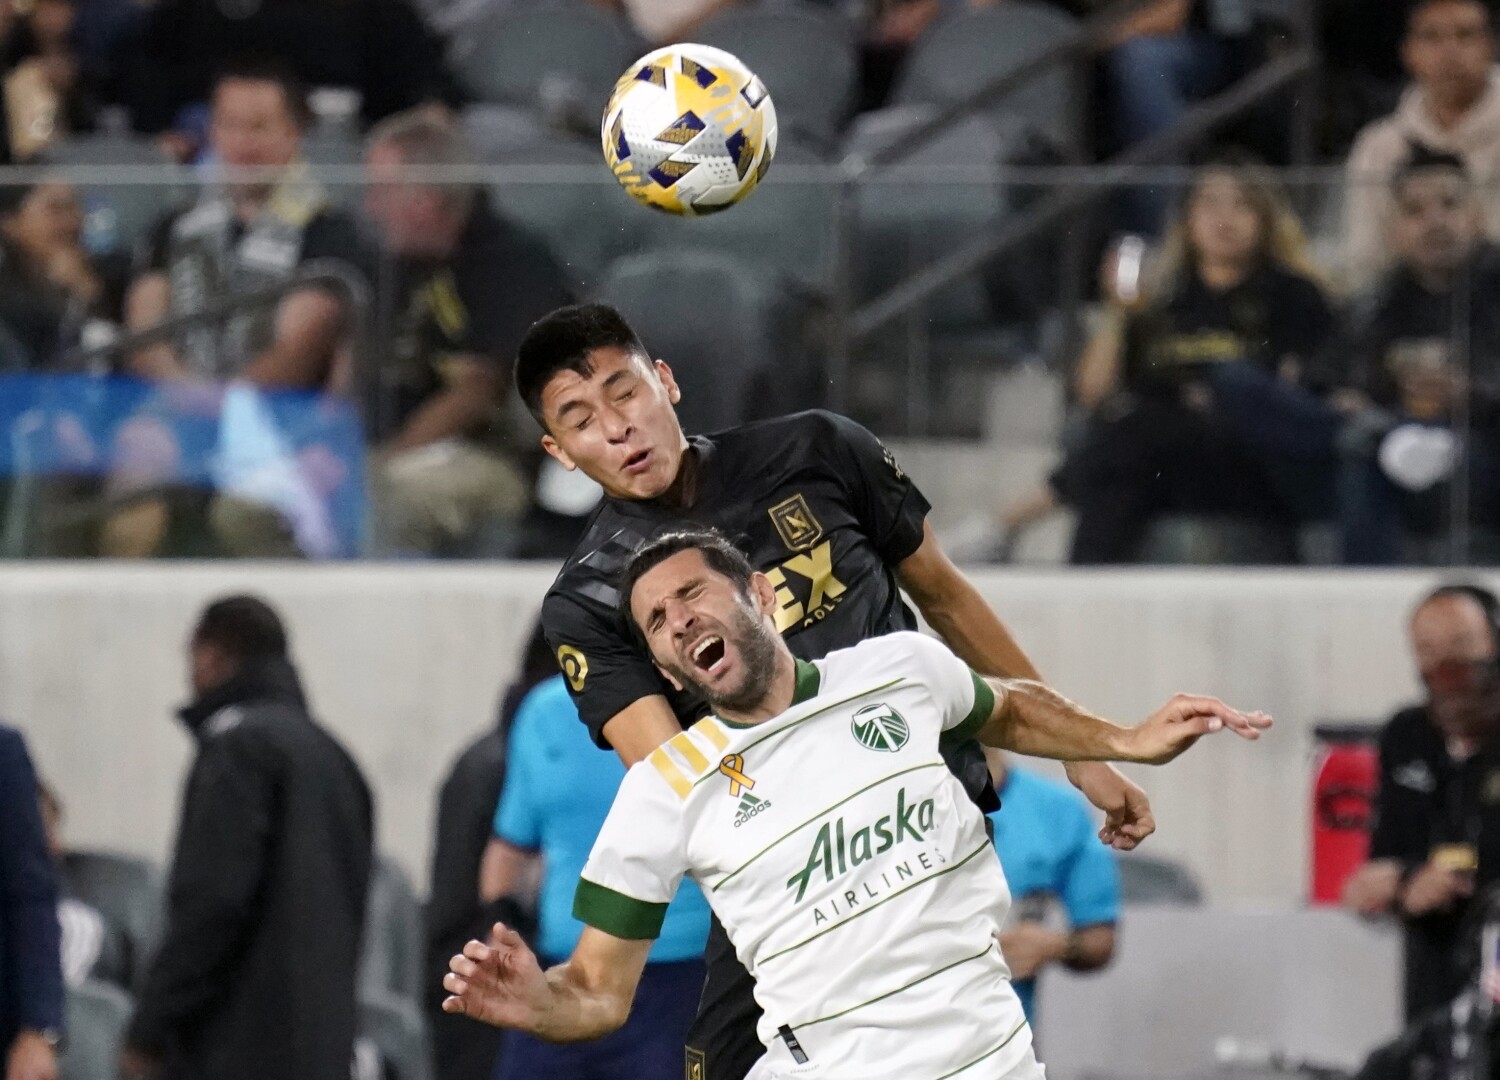 LAFC misses opportunity to jockey for playoff spot in loss to Timbers